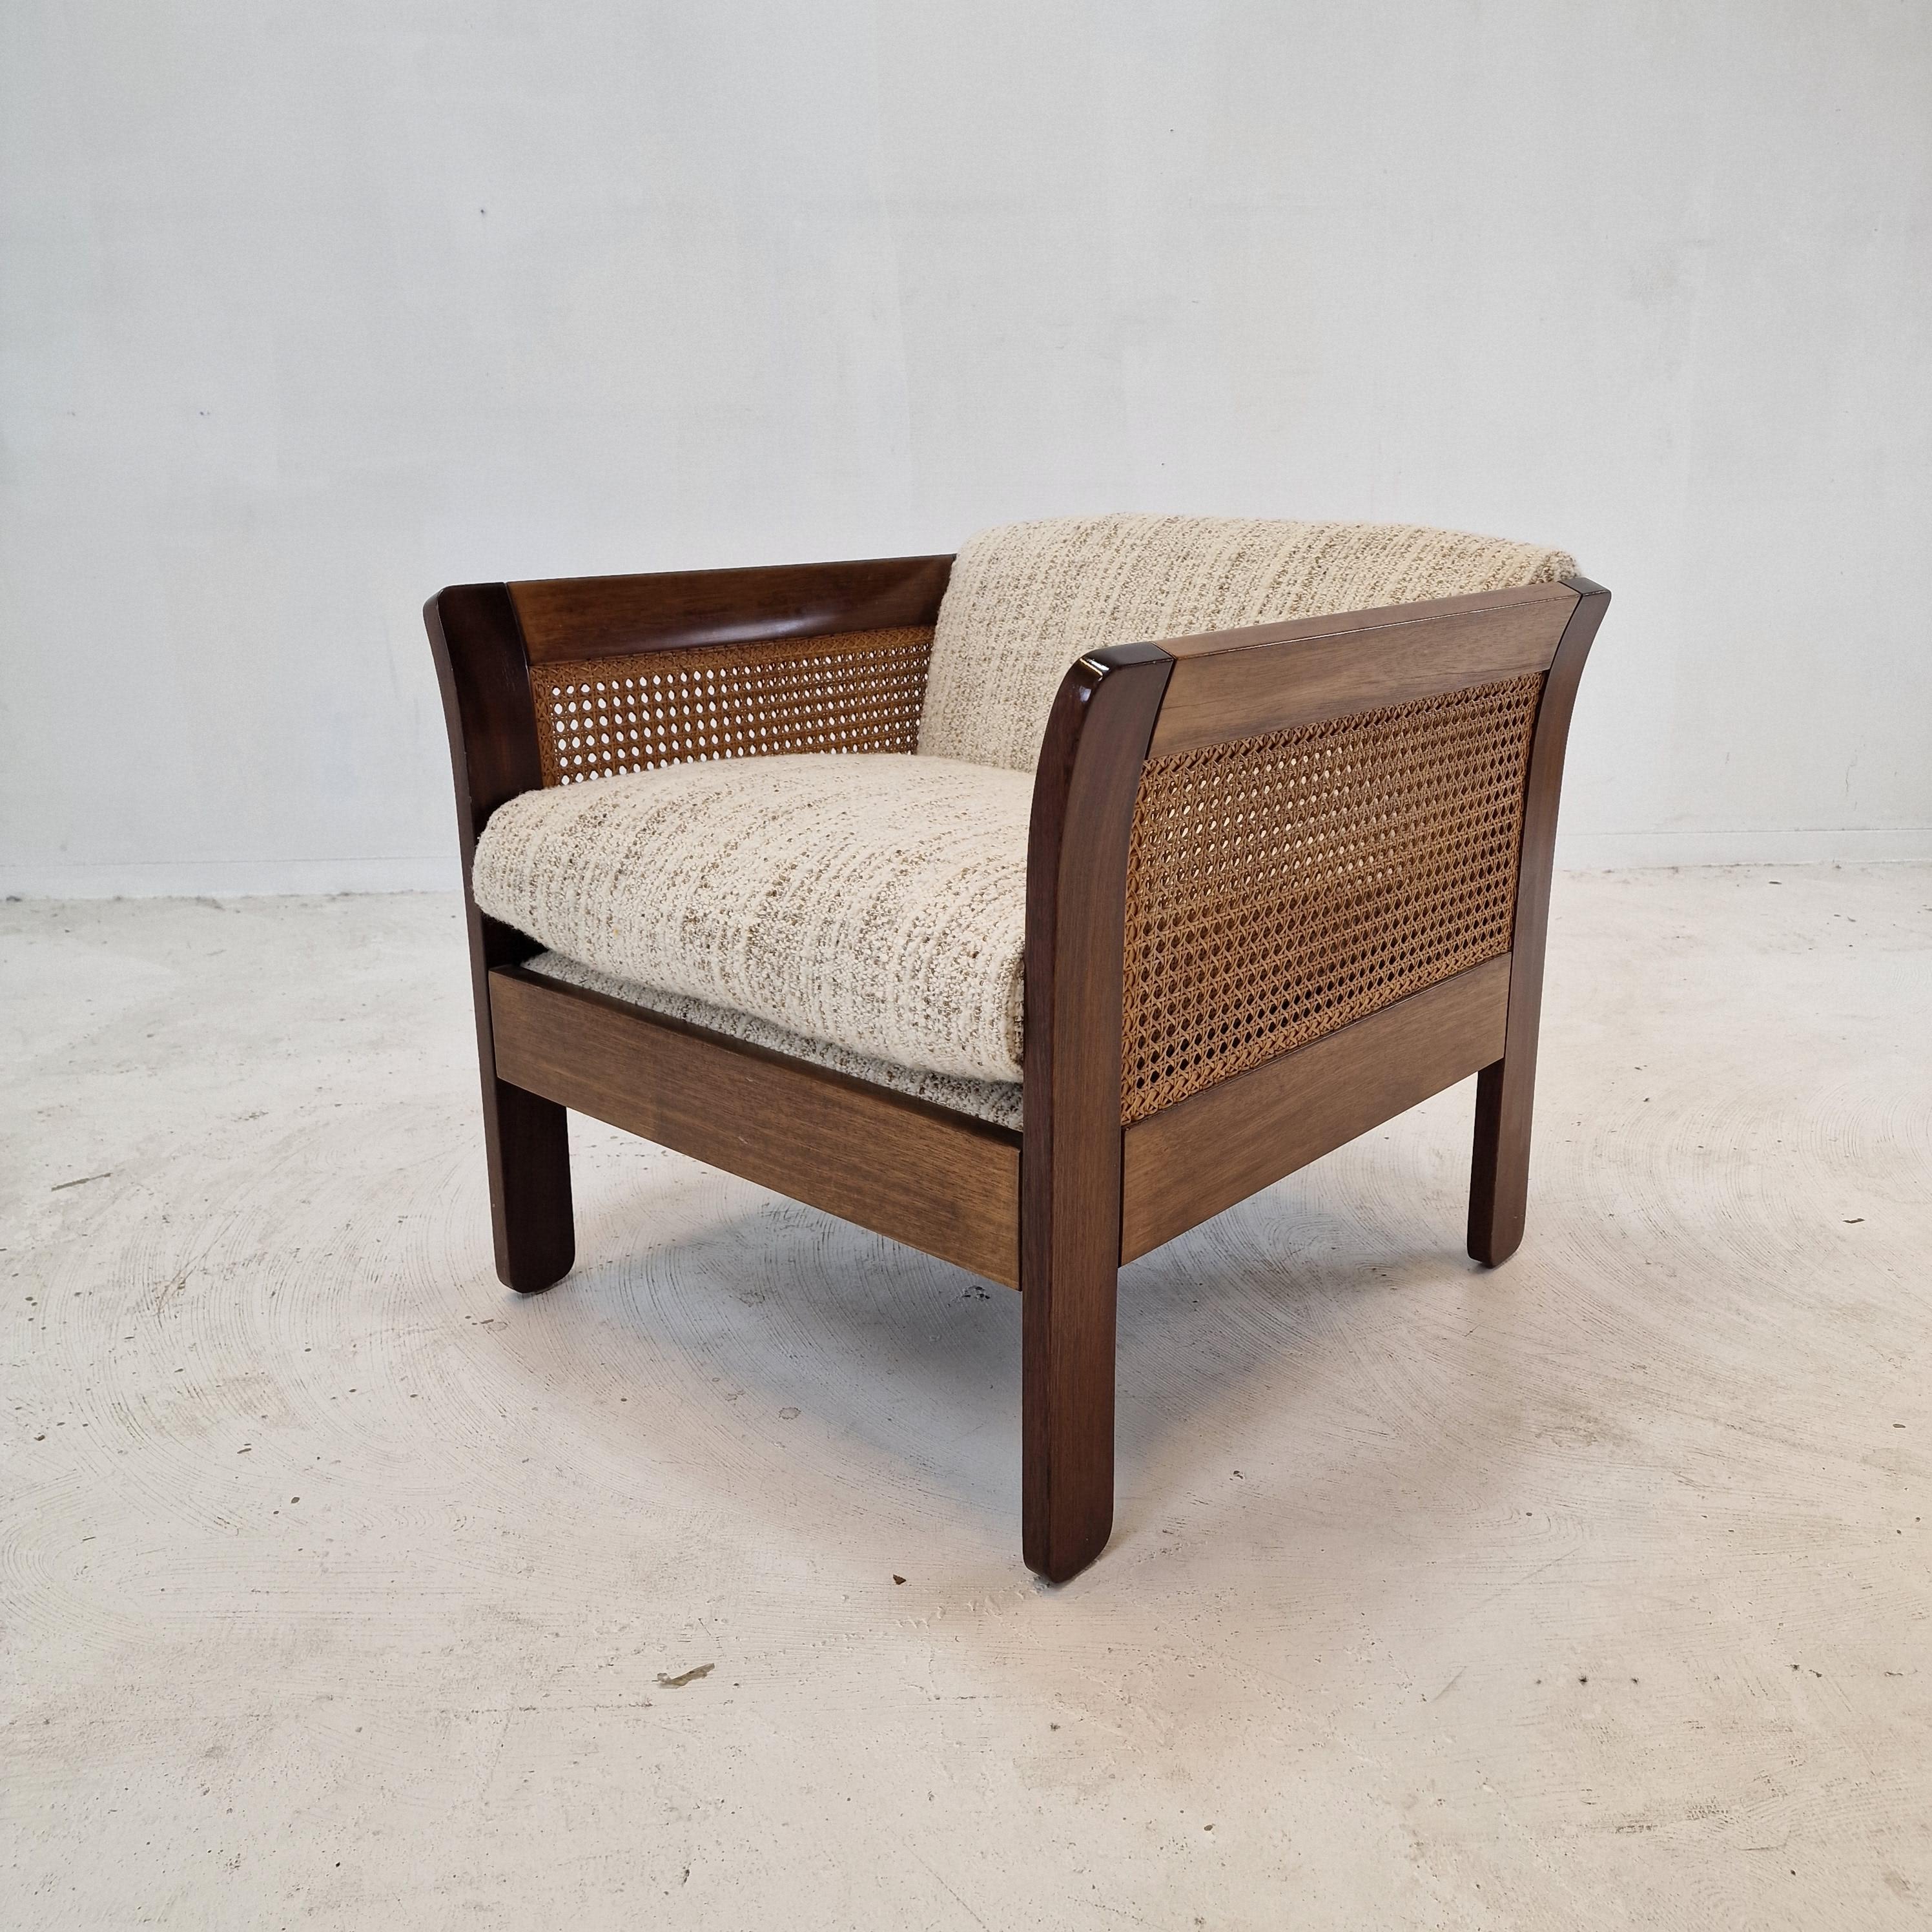 Mid-20th Century Midcentury Set of 3 Italian Wood with Rattan Club Chairs, 1960s